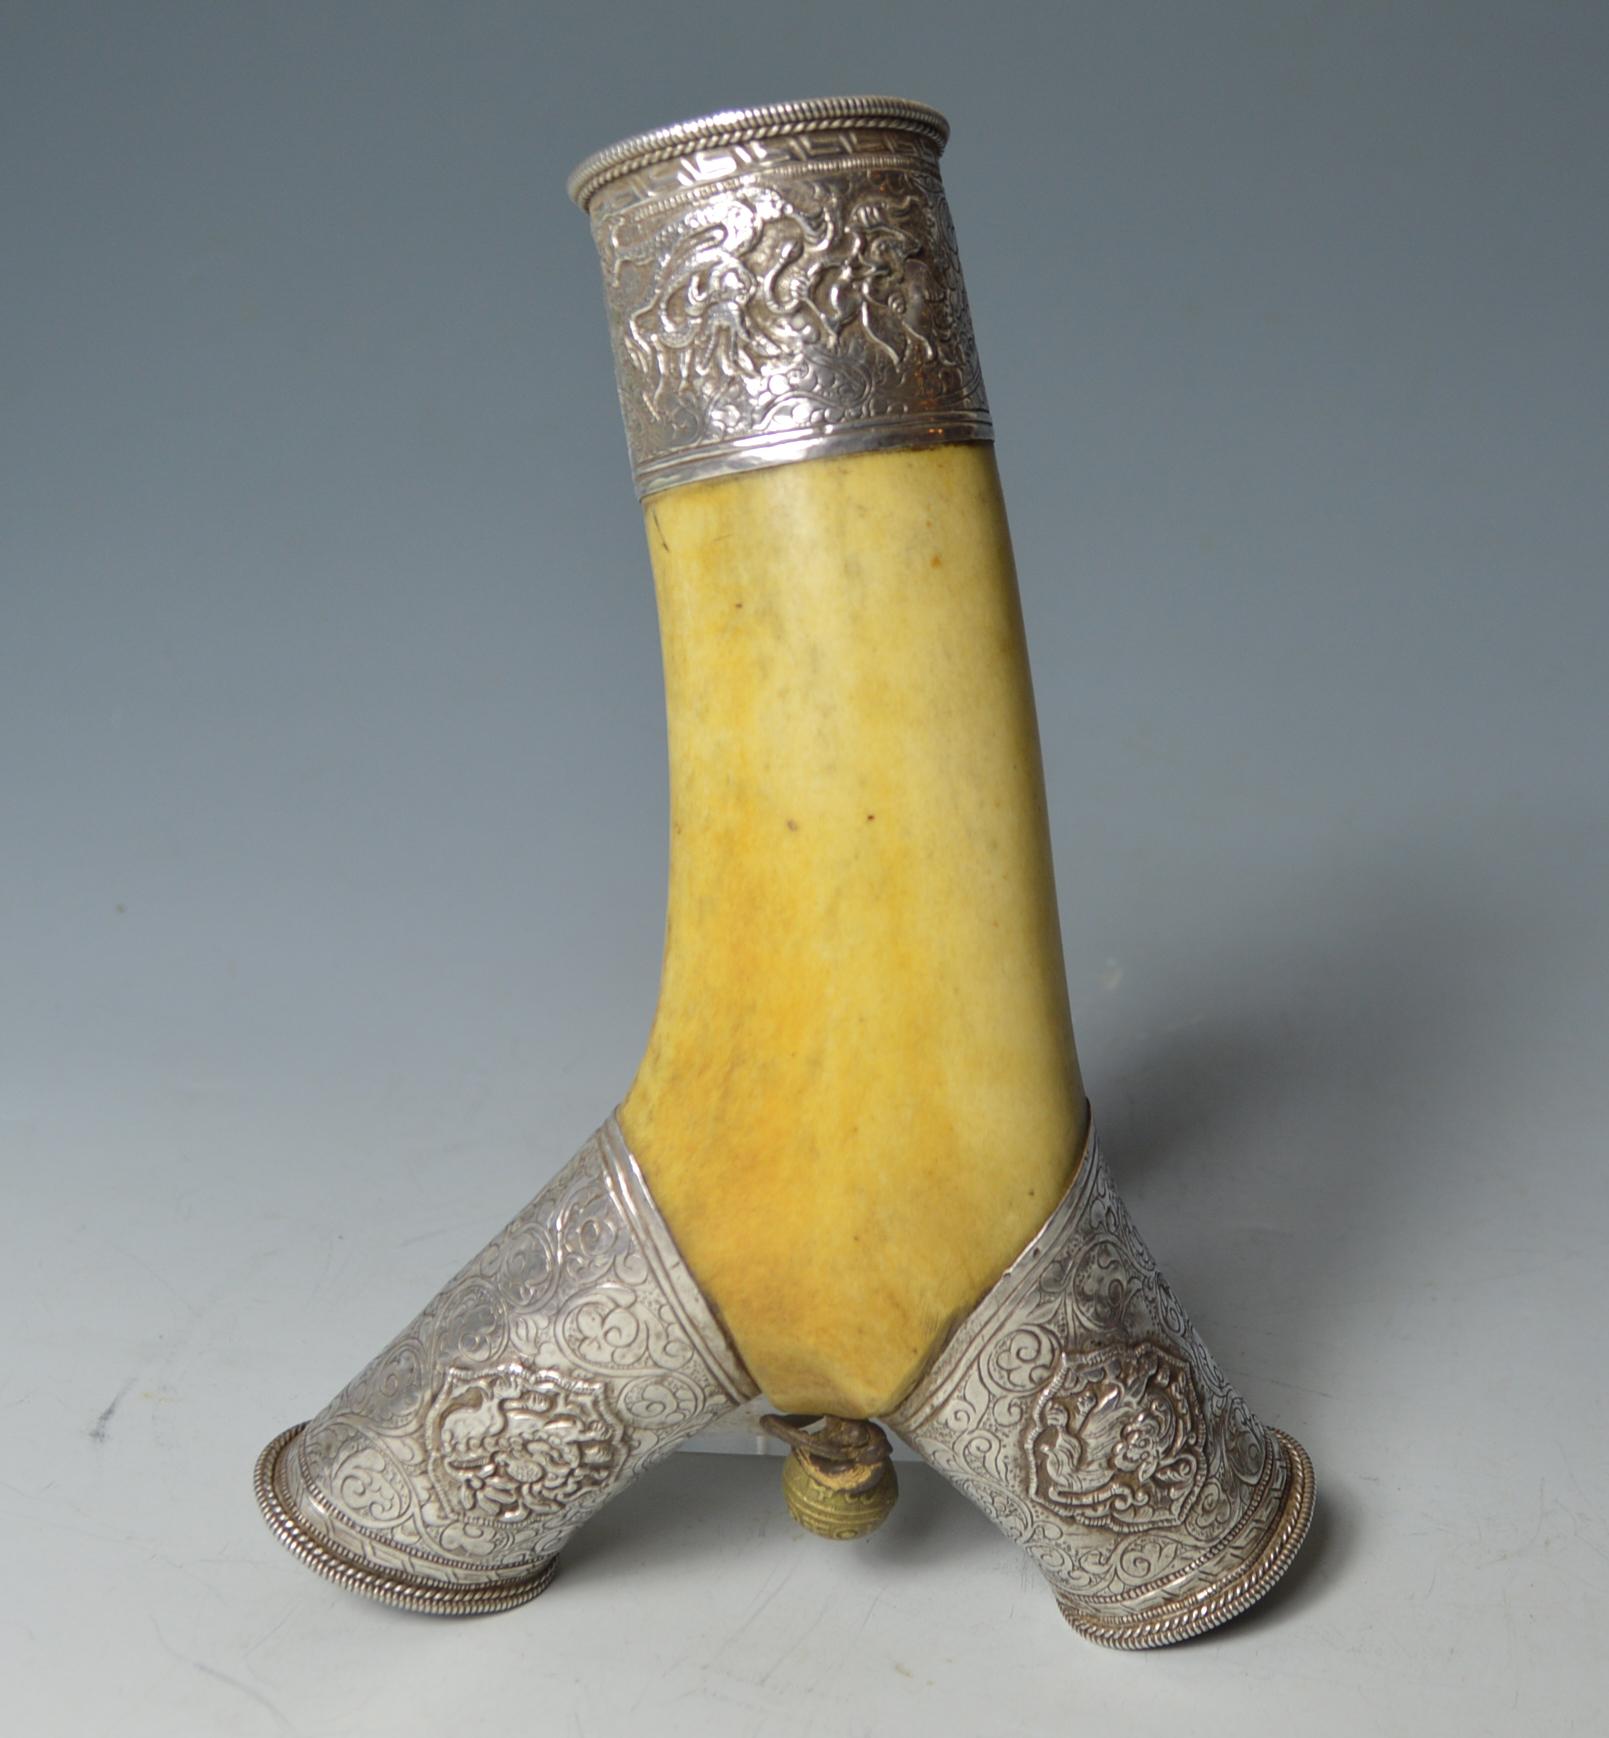 Superb rare Tibetan stag antler silver snuff vessel,  
A large stag horn snuff container decorated with silver coral turquoise and a small brass bell
Period: 19th century and earlier
Ex UK collection
Measures: Length 21 cm, width 12 cm
Condition: